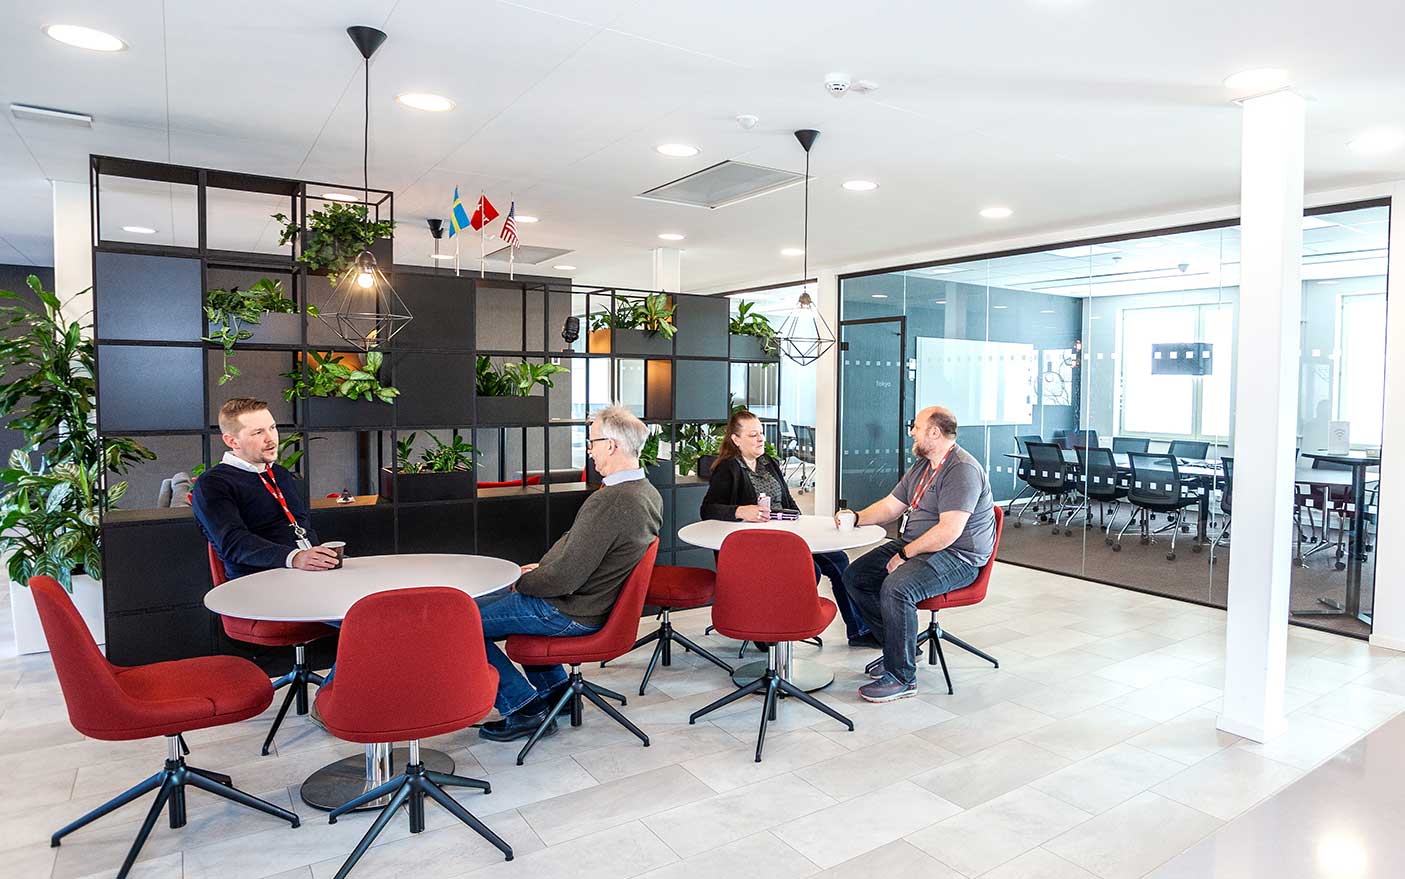 Co-workers meeting in a new office breakout area, designed by Mobius At Work